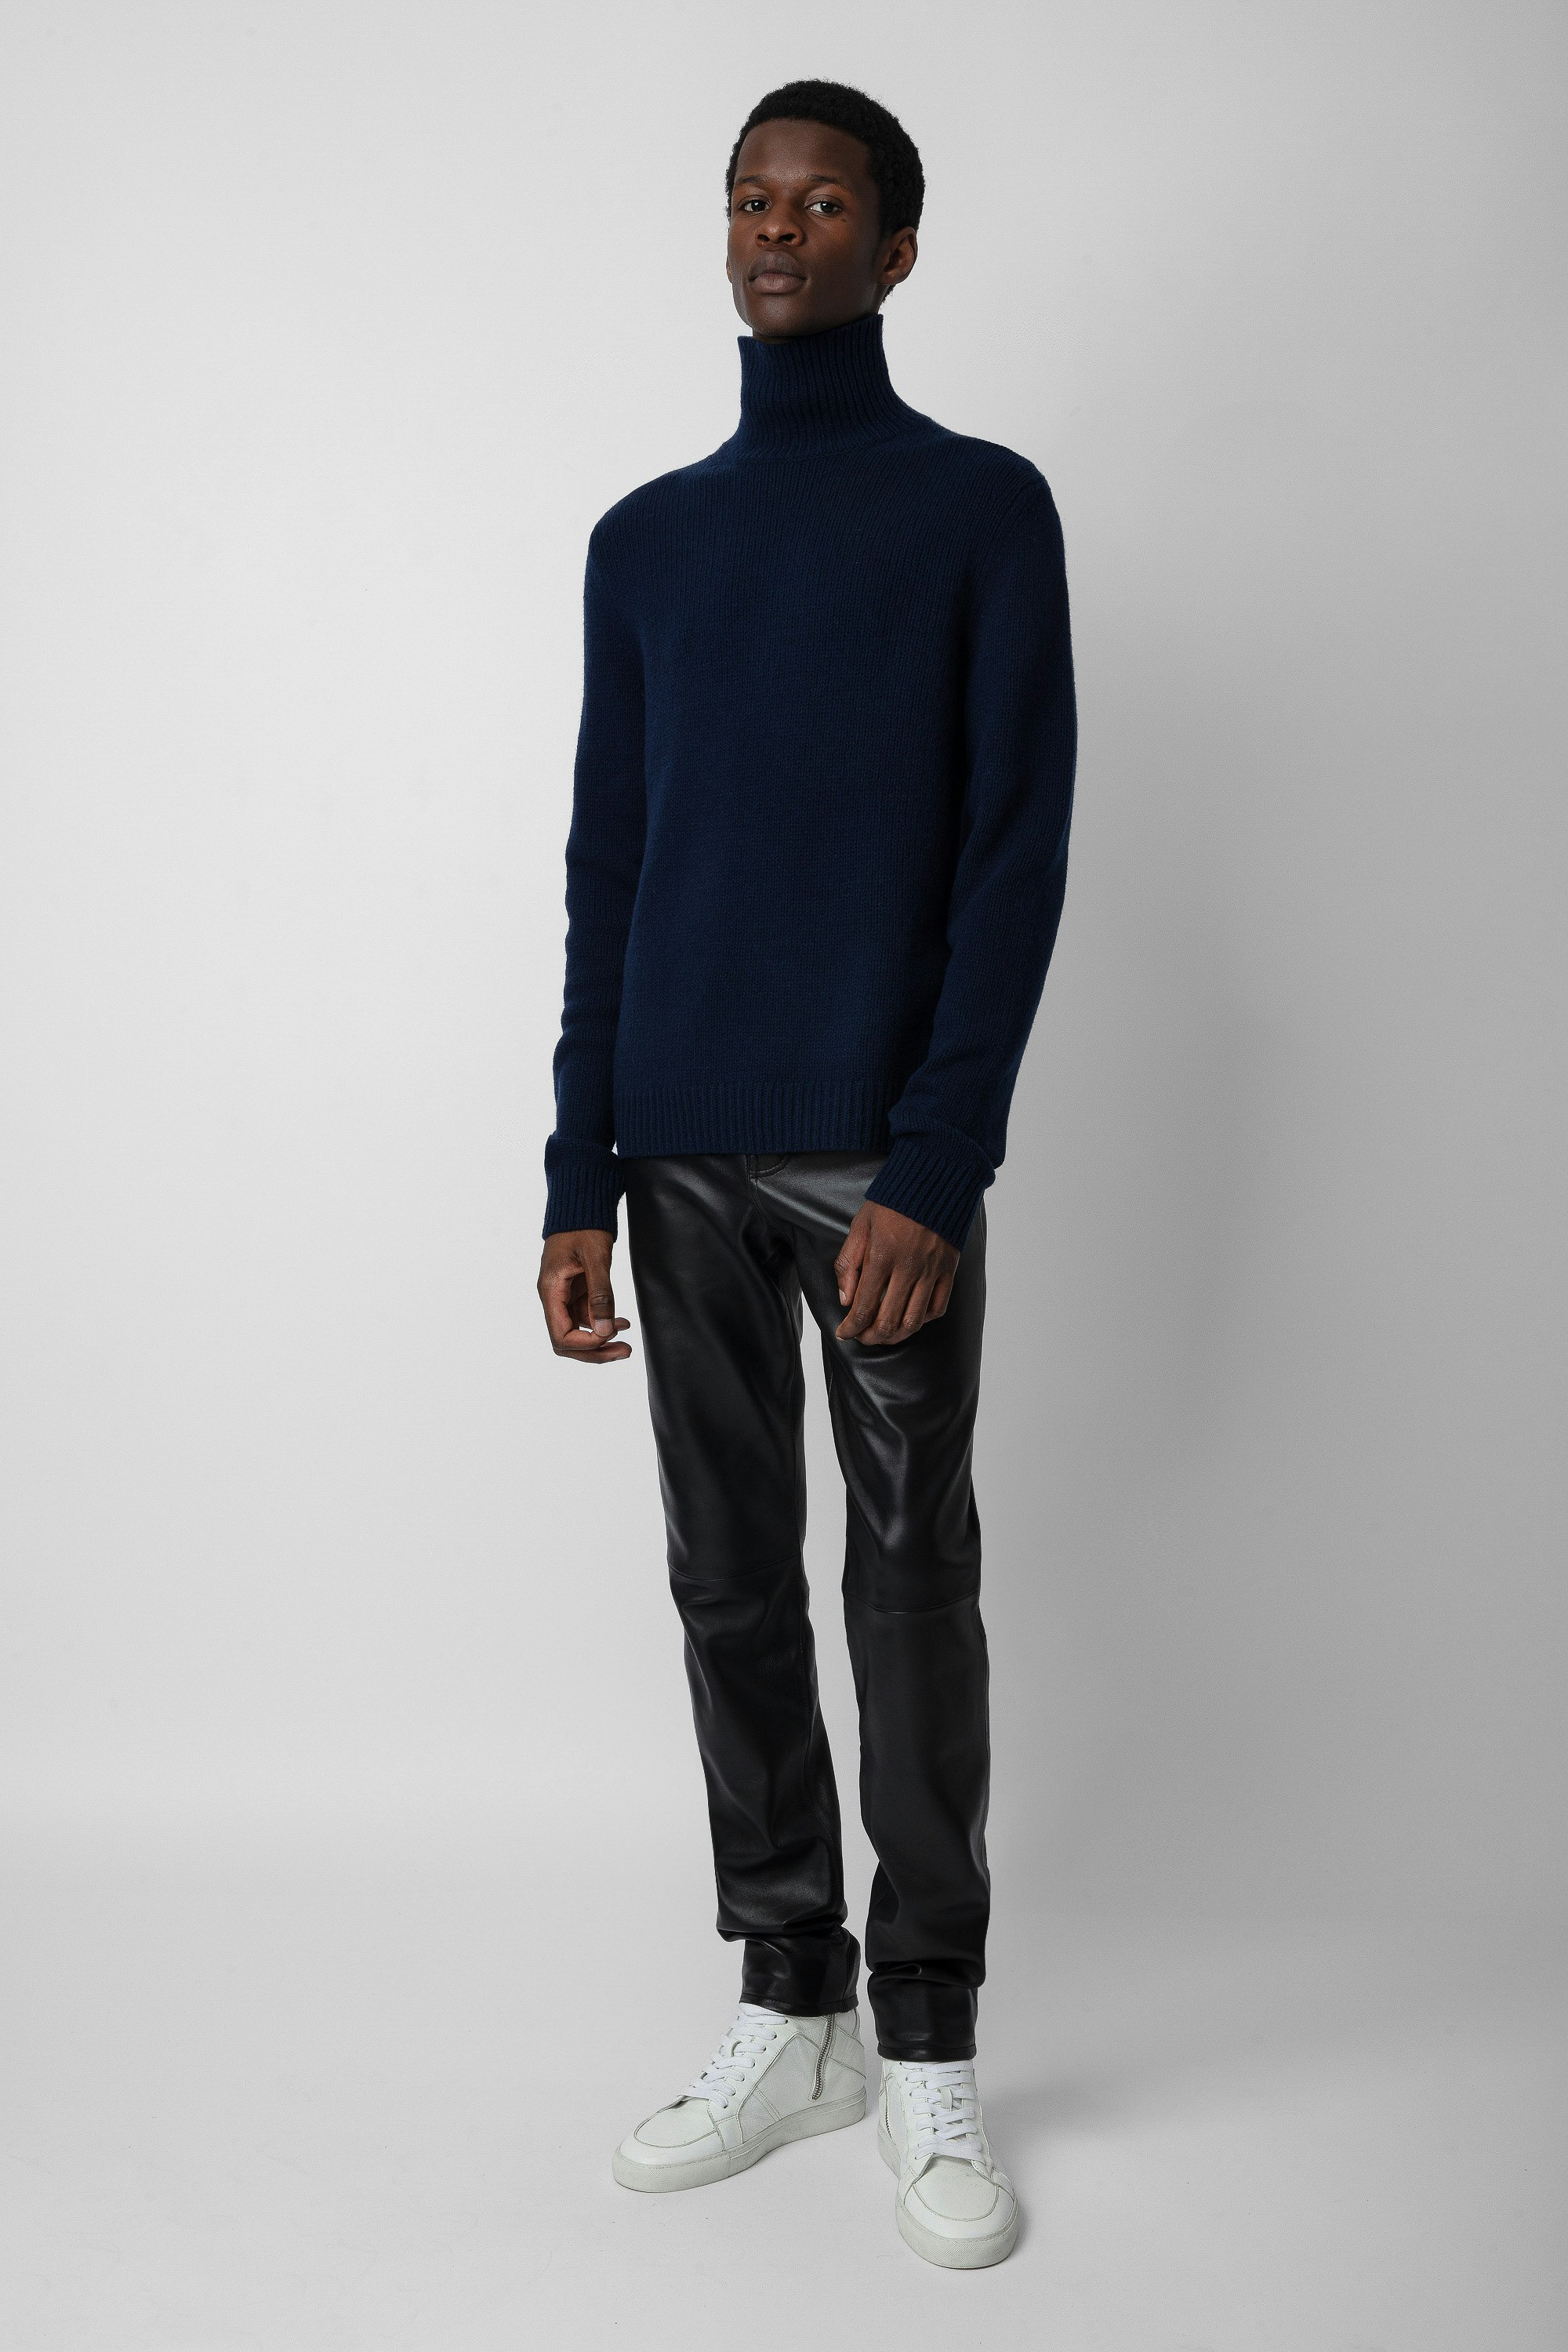 Pull Jumper - Men’s value merino wool jumper with high collar and arrow motifs on back.